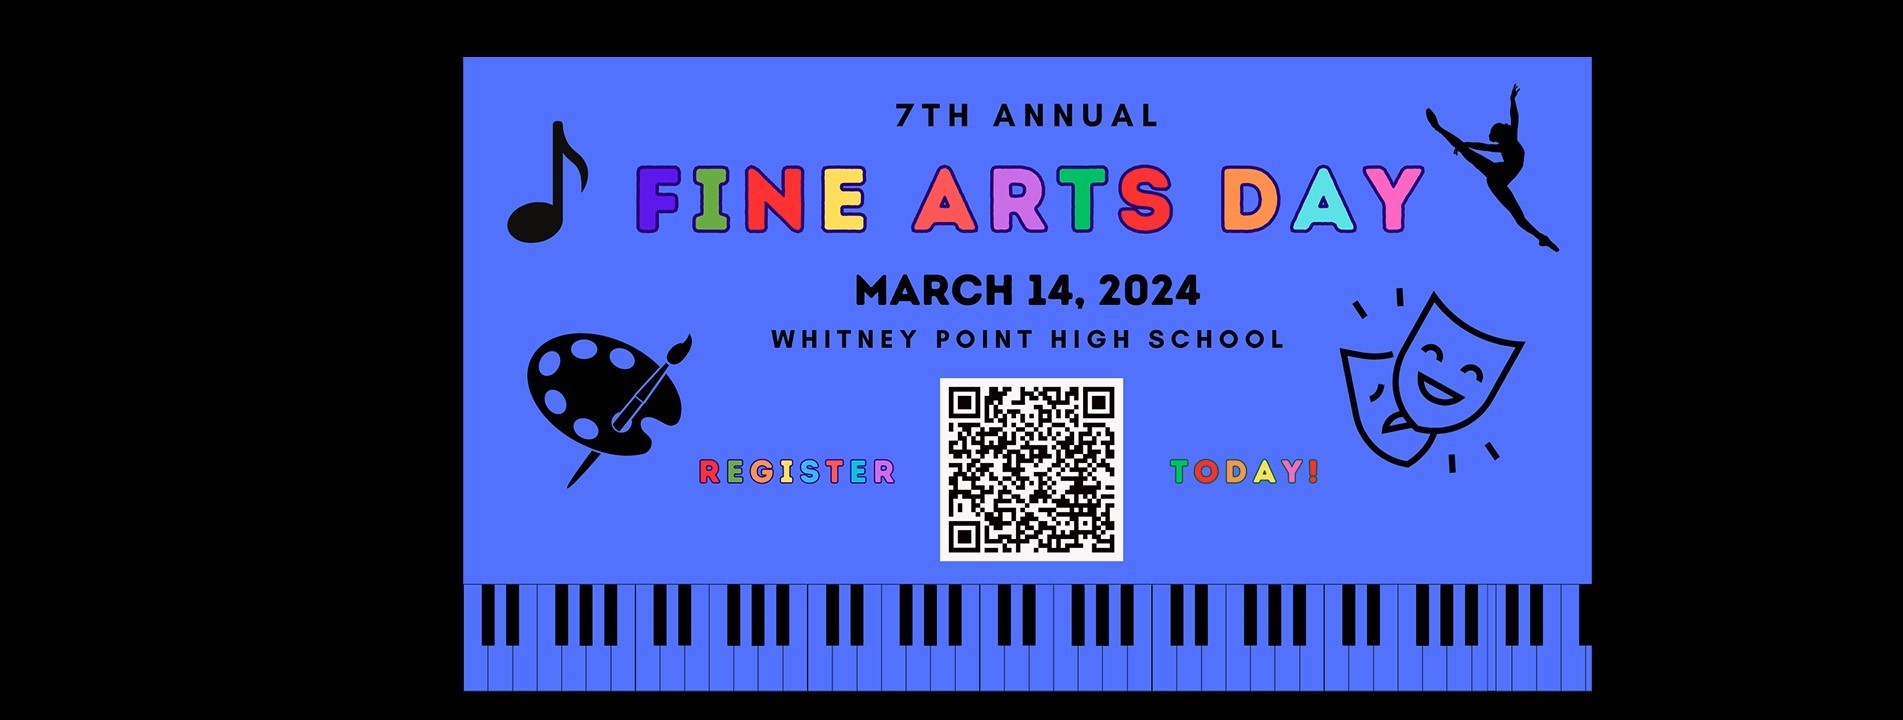 Fine Arts Day. March 14, 2024. Whitney Point High School.